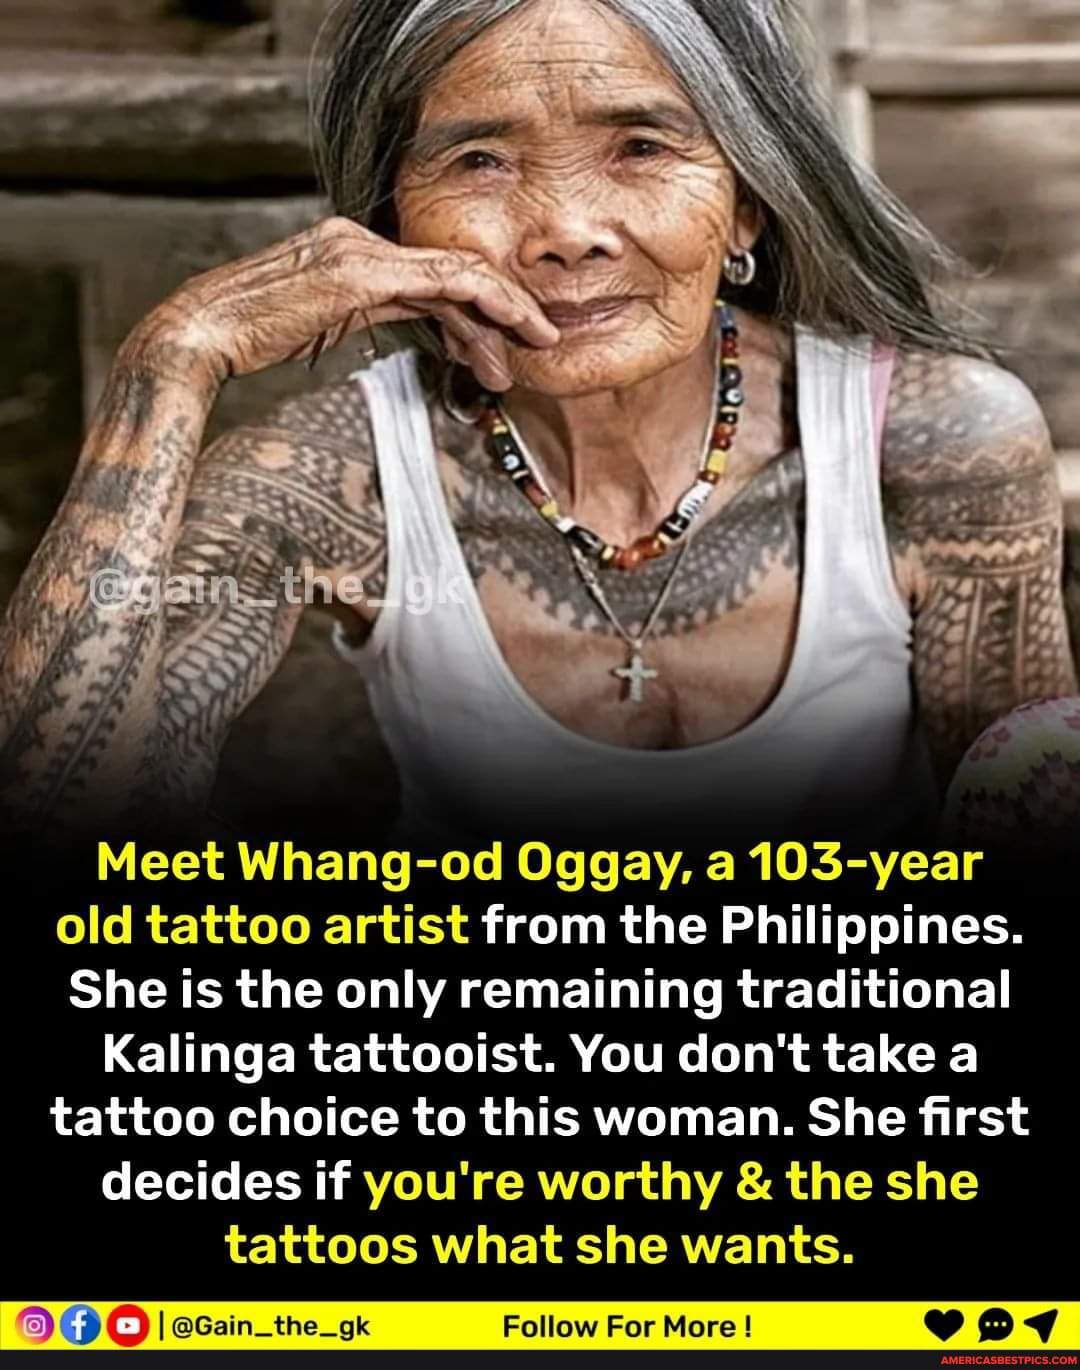 Tattoo artists in the Philippines Everyone wants ink from Whang Od Oggay   newscomau  Australias leading news site